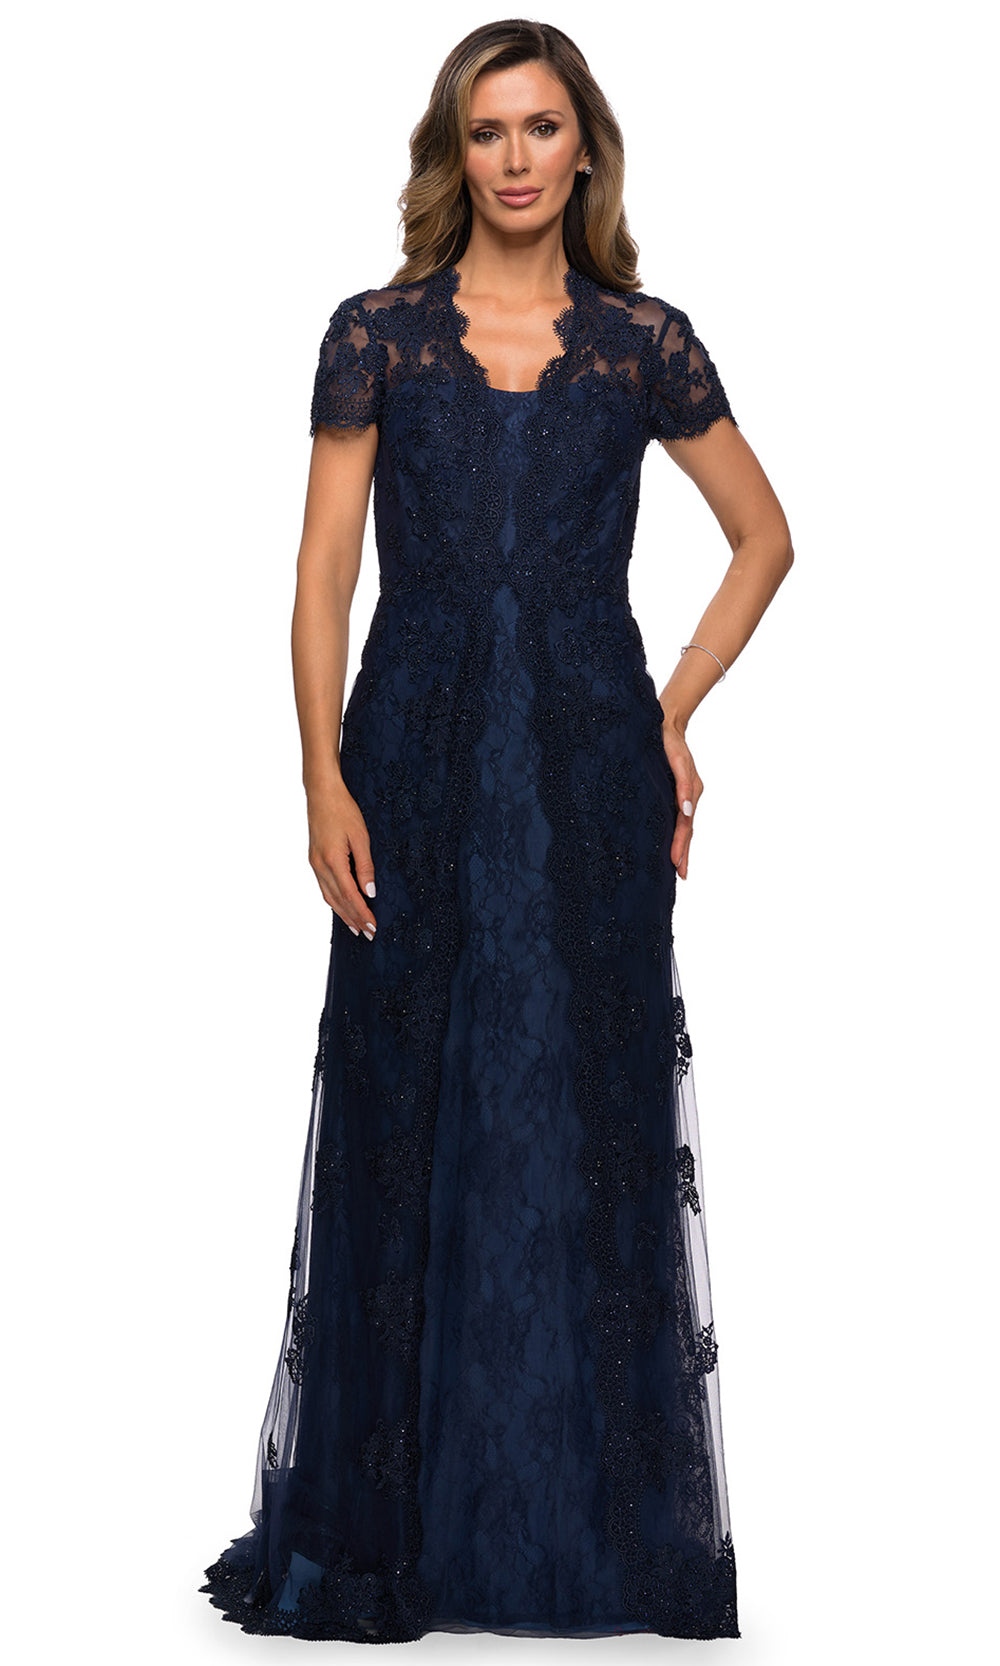 La Femme - 28195 Short Sleeve Embroidered Scallop Lace Dress In Blue